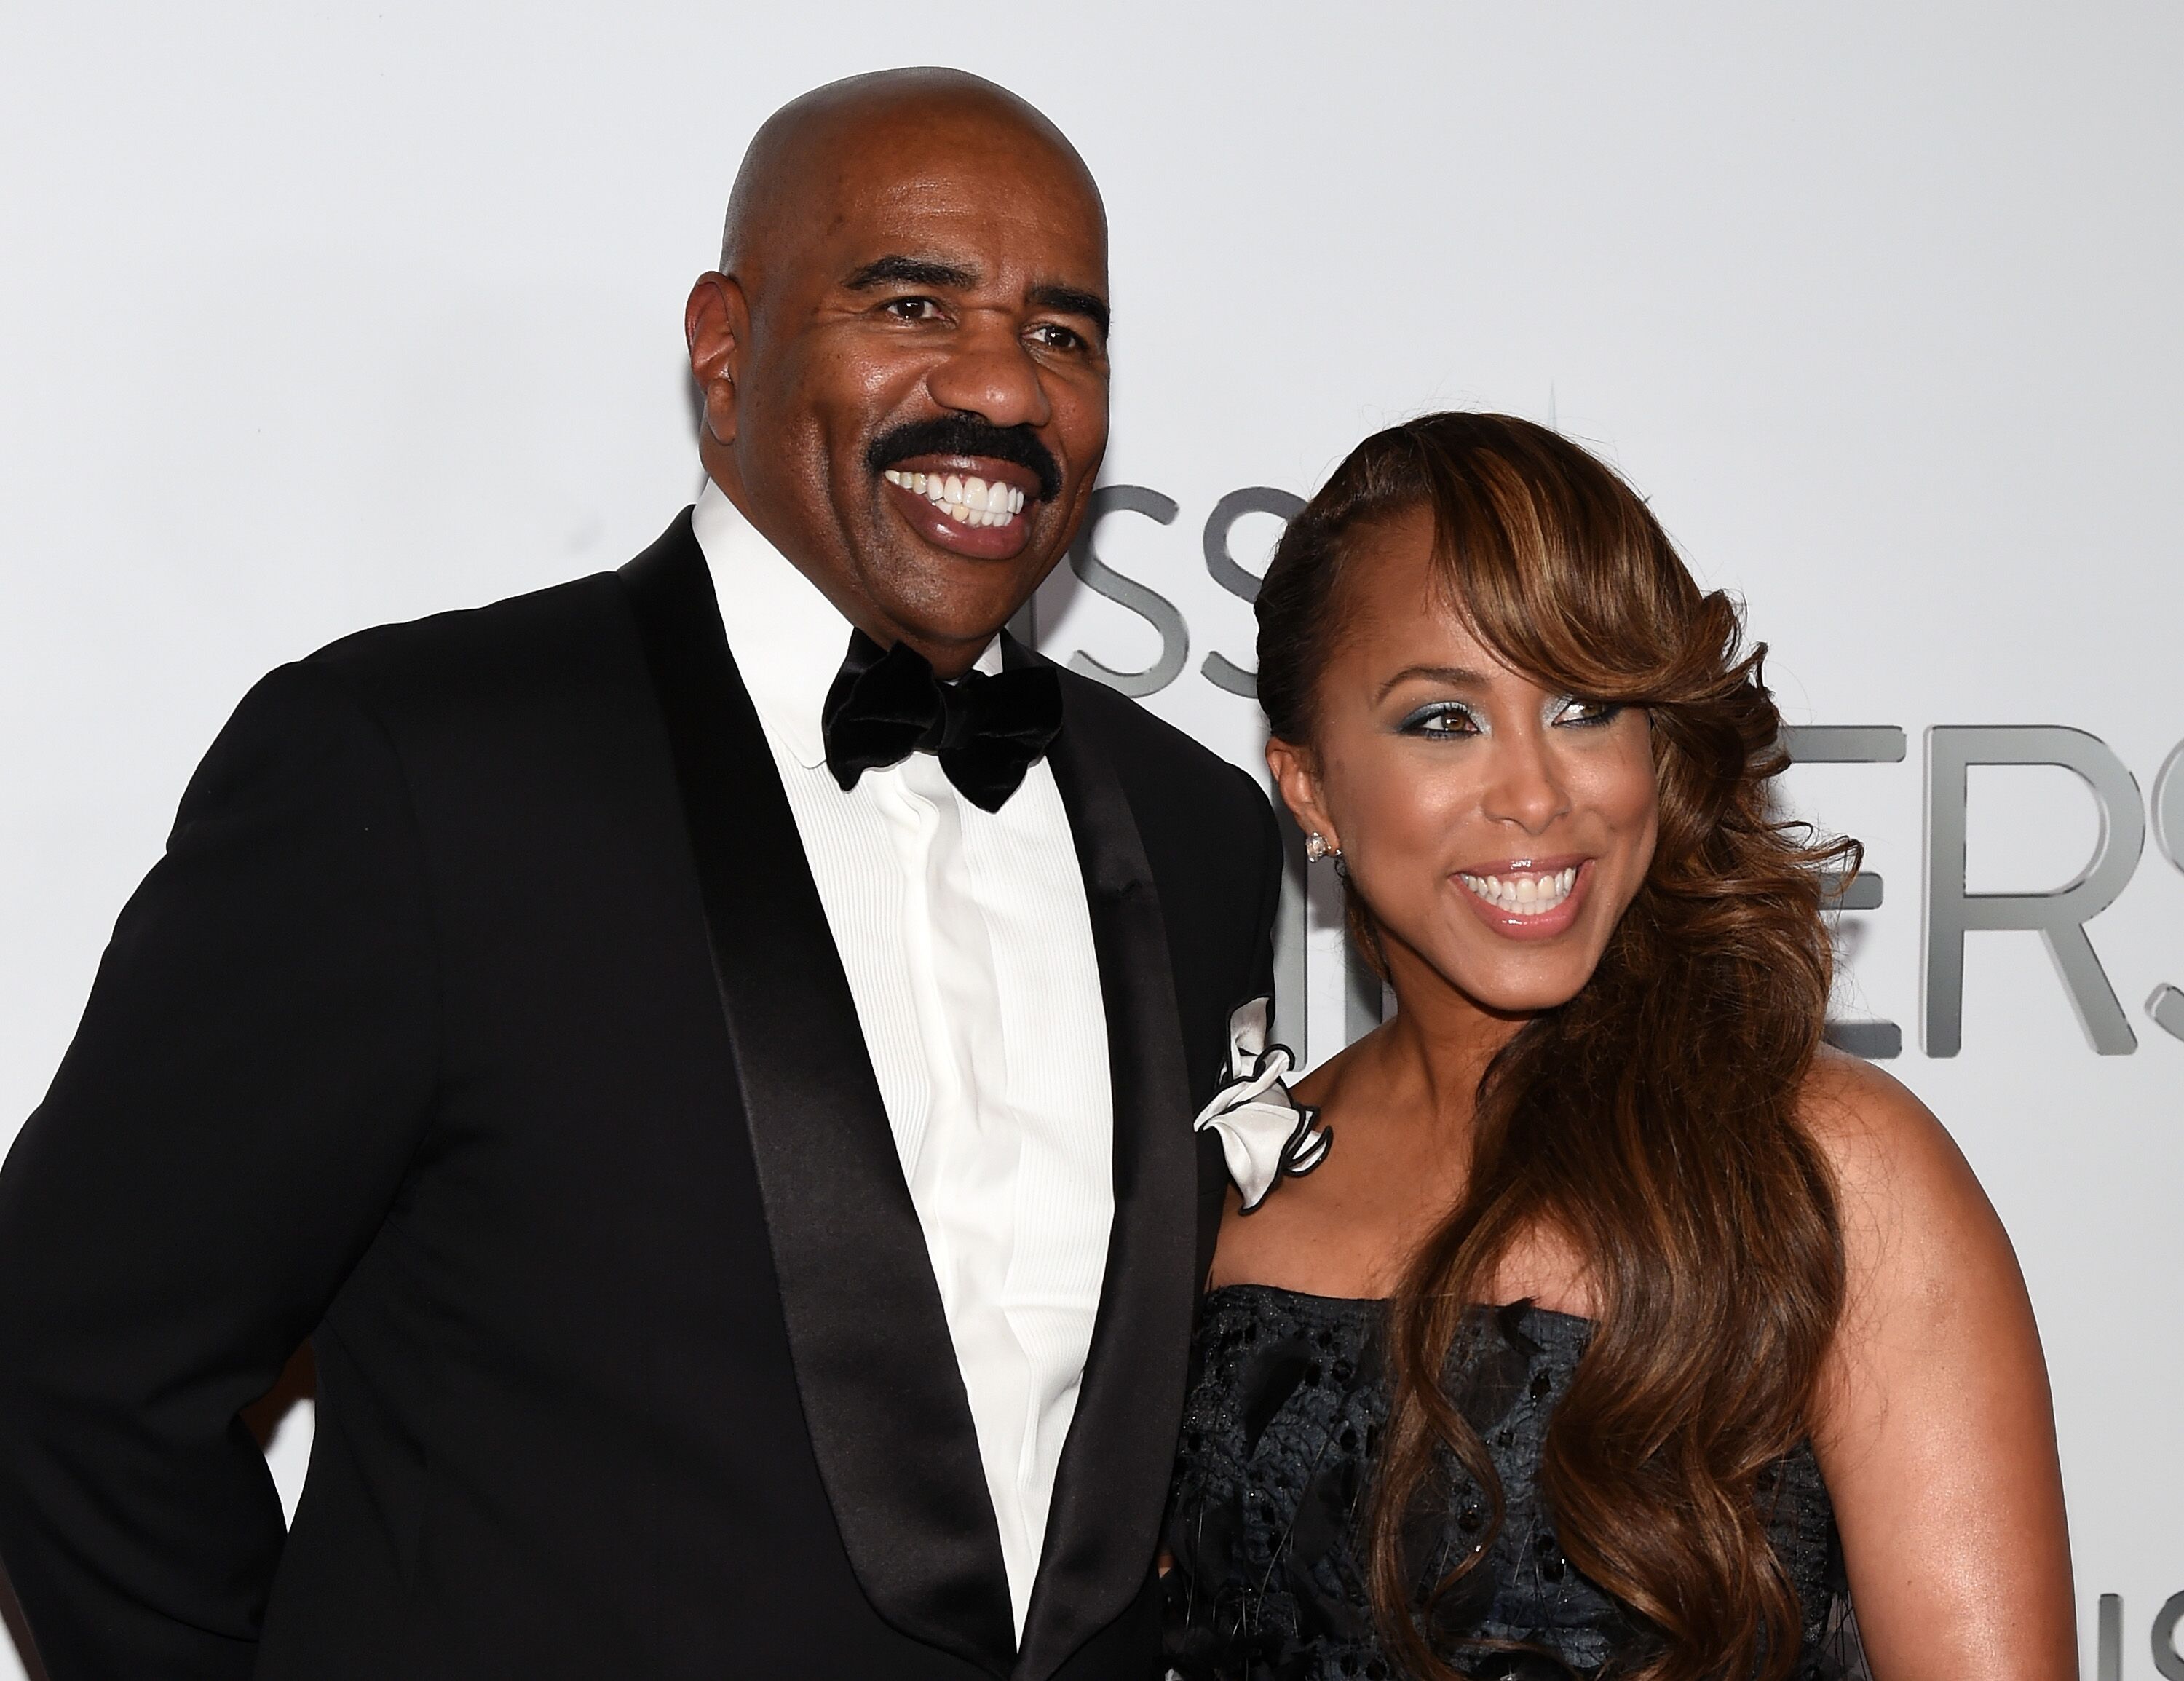 Steve and Marjorie Harvey during one of their red carpet appearances | Source: Getty Images/GlobalImagesUkraine